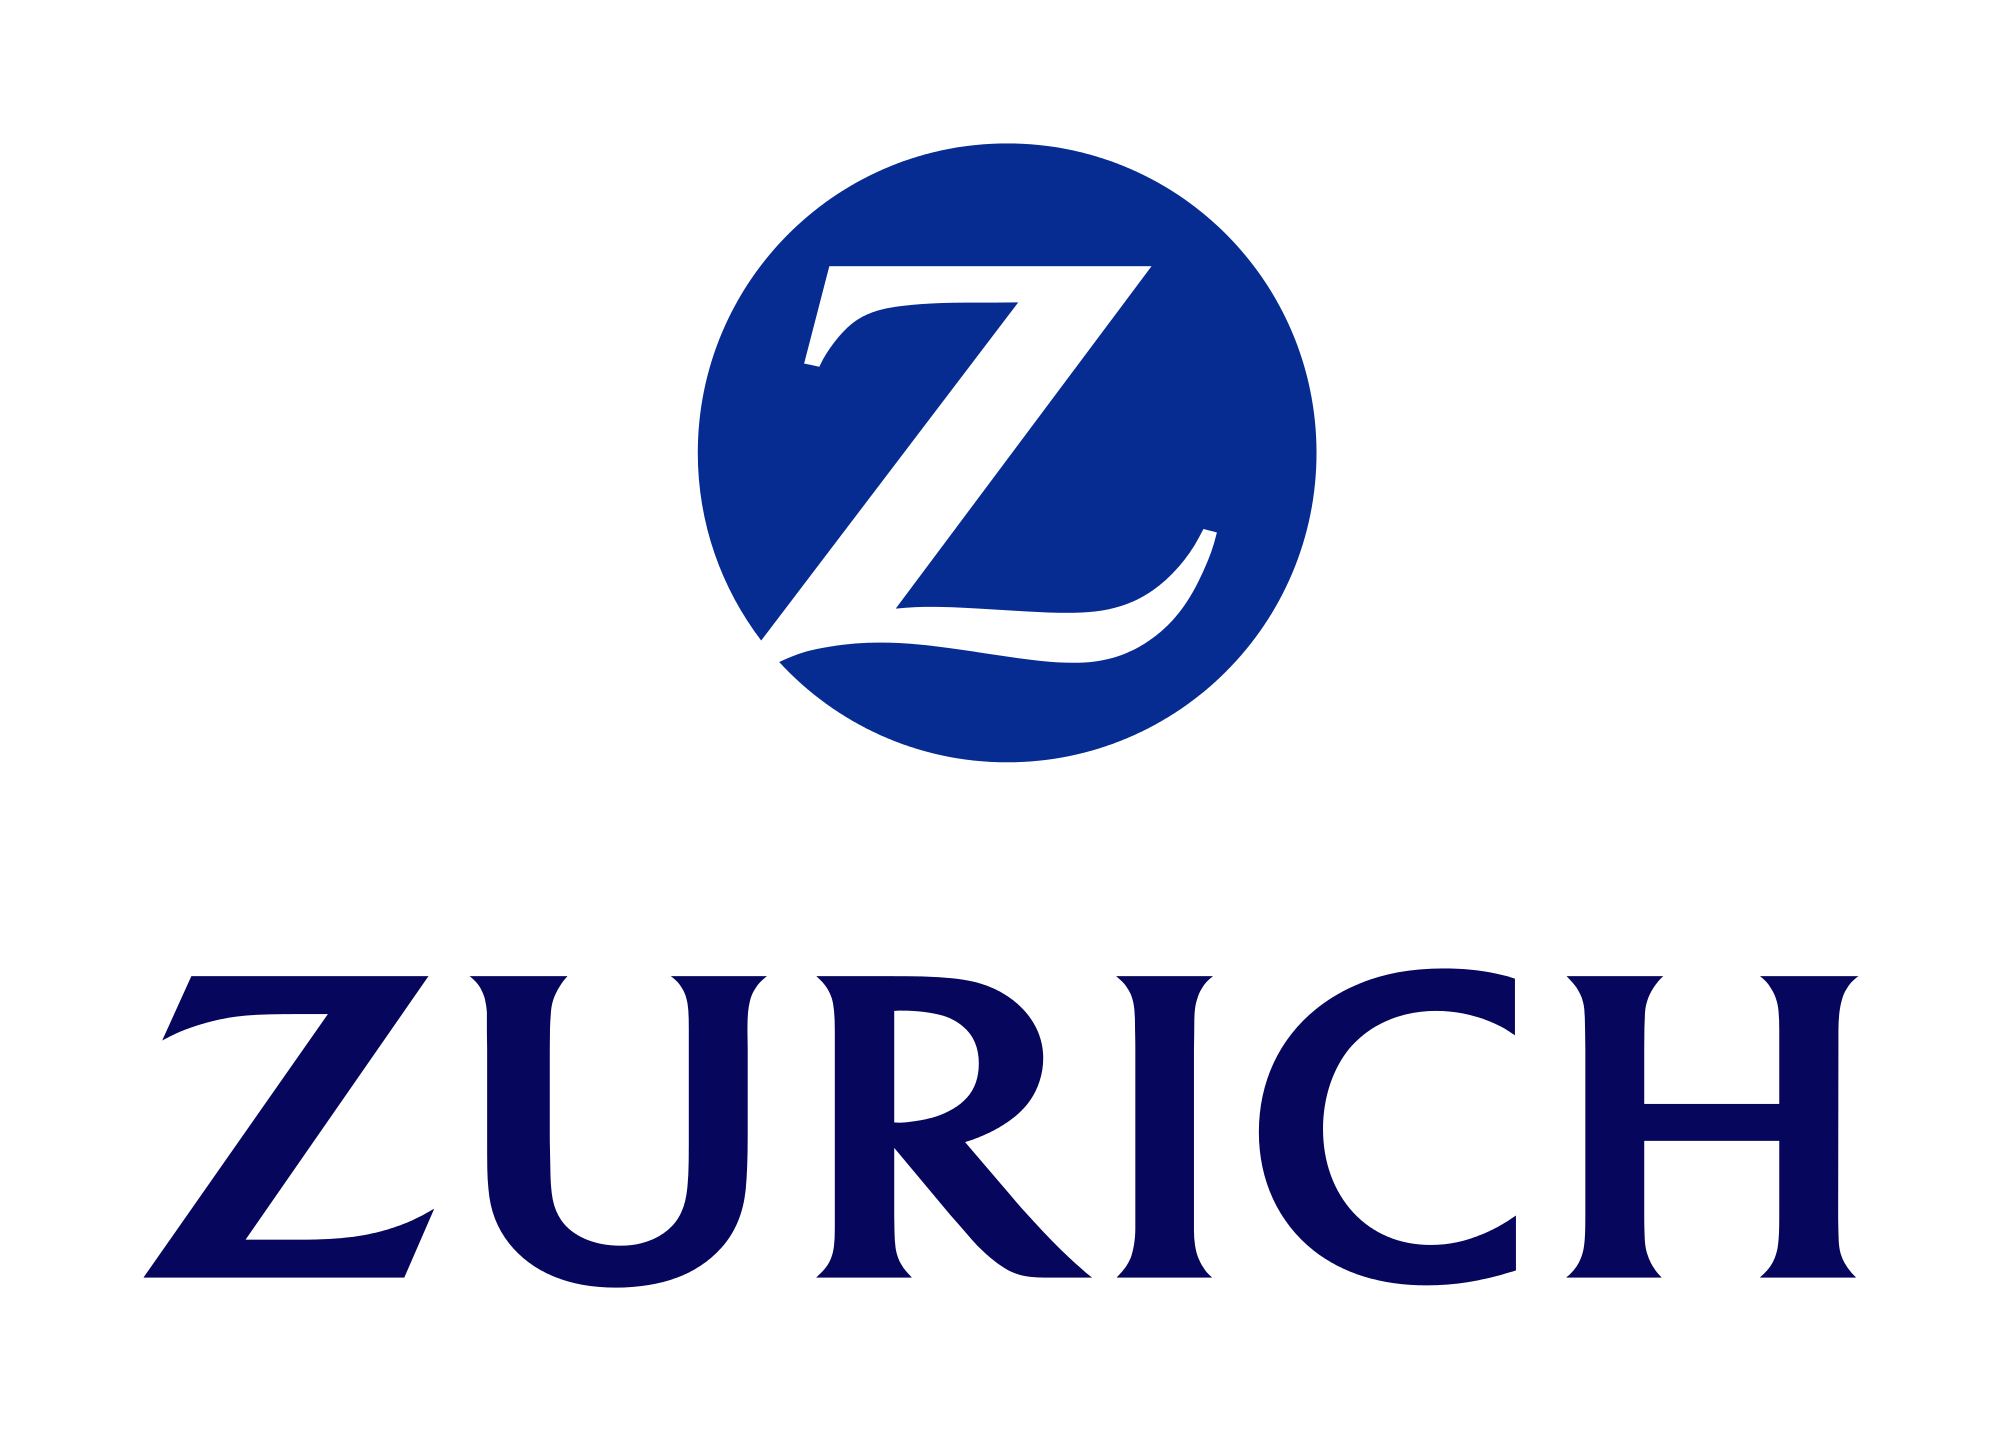 Zurich’s cessions to reinsurance & retro rise another 7% in 2021